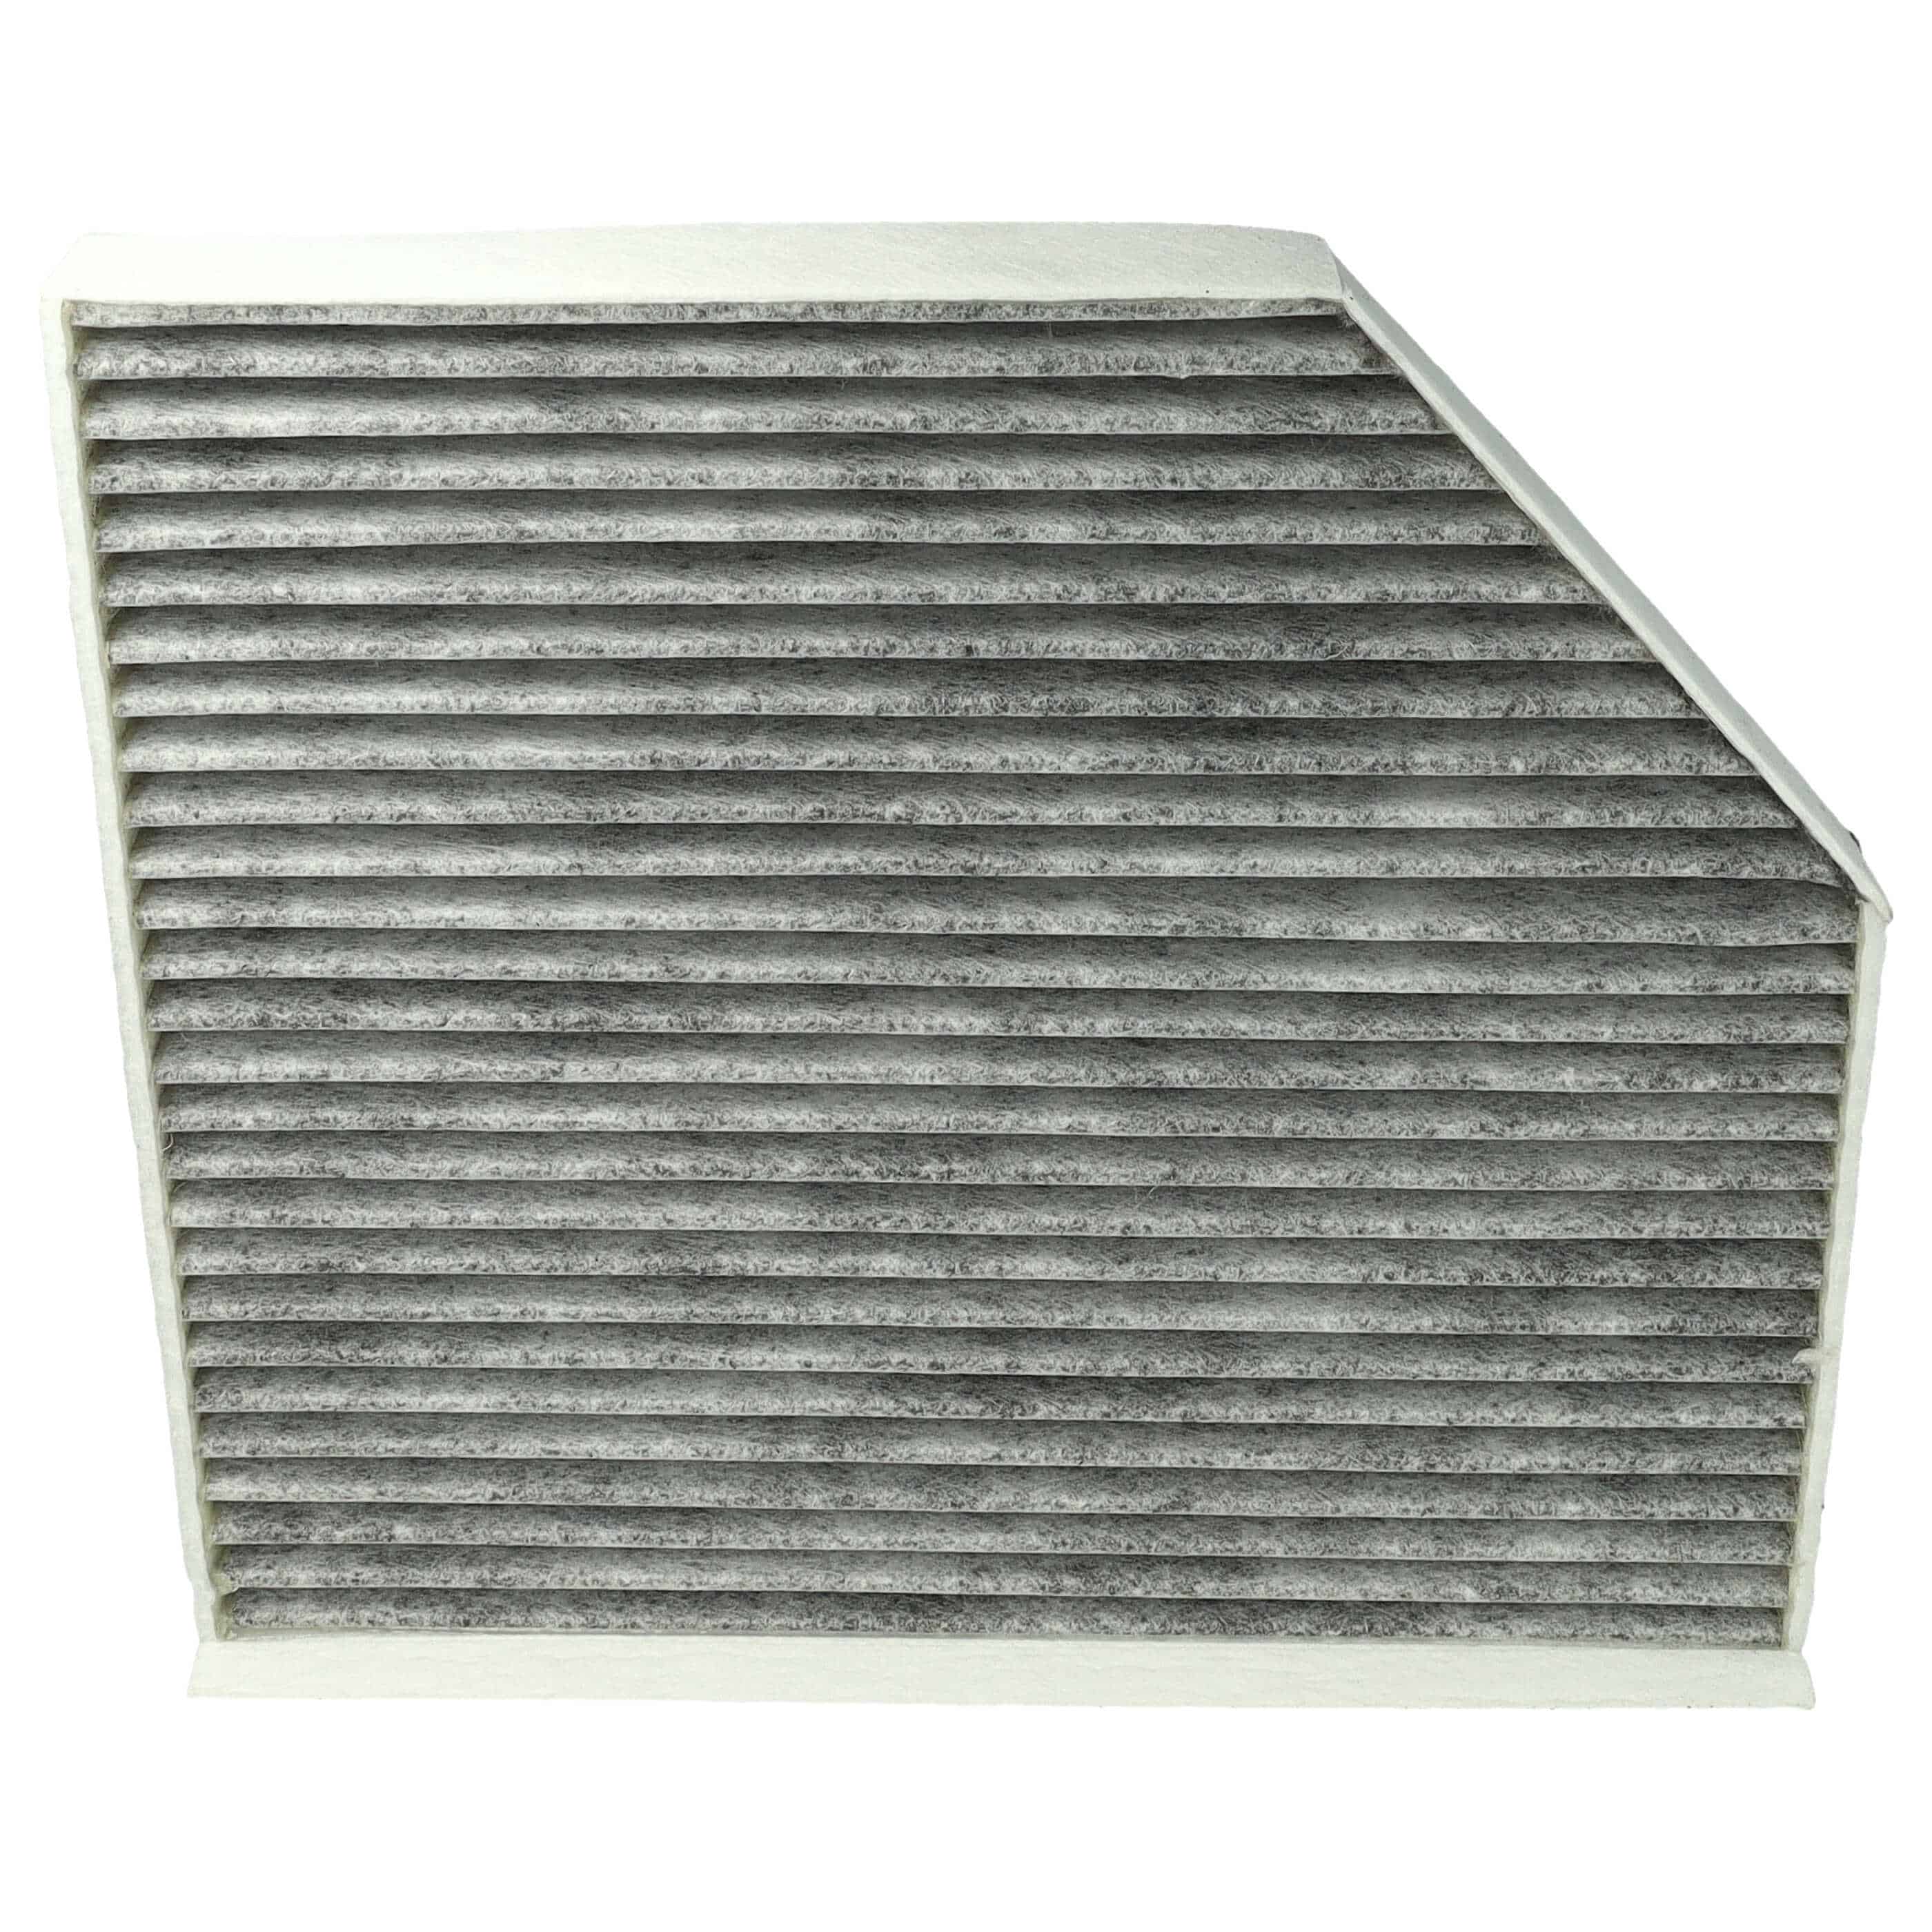 Cabin Air Filter replaces 424I0040 etc.